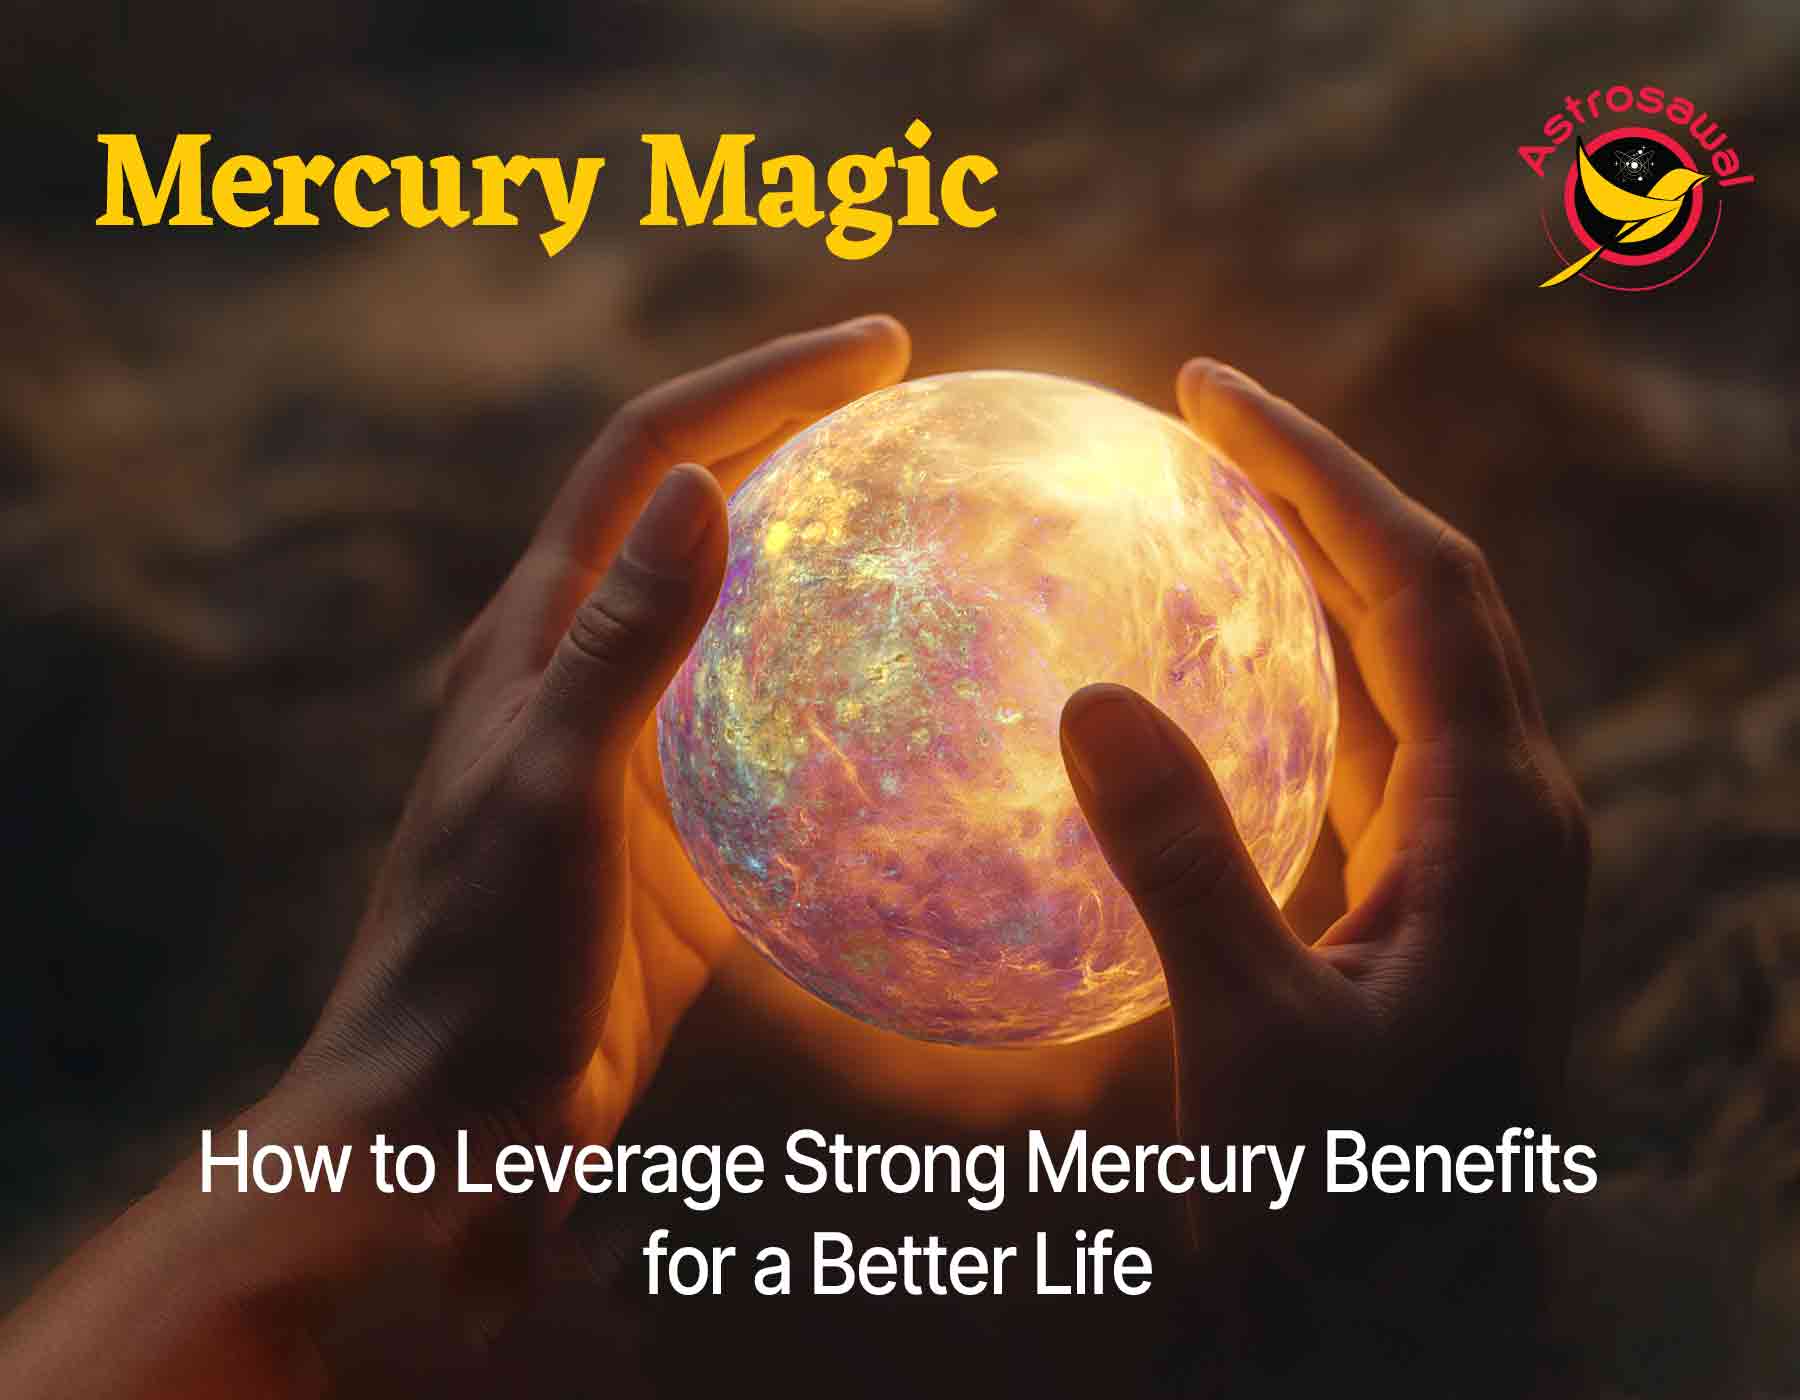 Mercury Magic: How to Leverage Strong Mercury Benefits for a Better Life